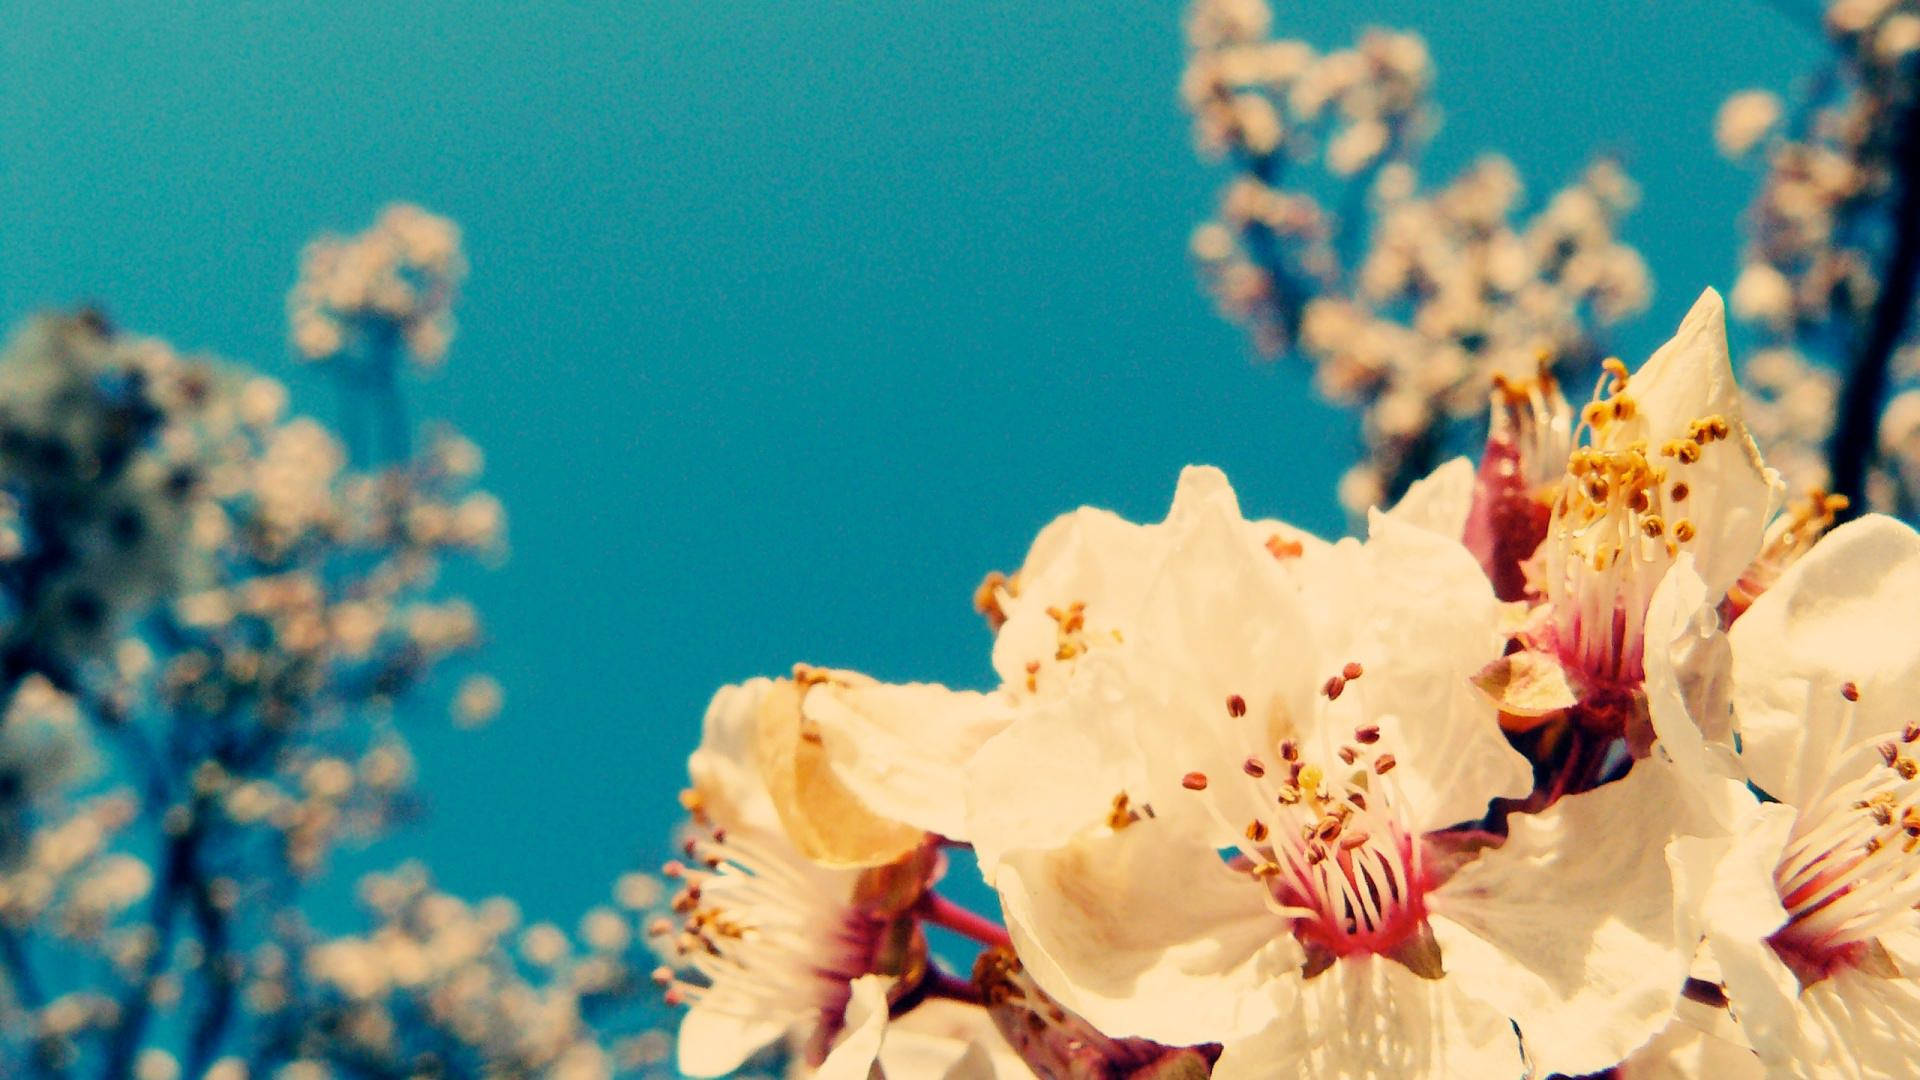 Blossoms Vintage Aesthetic Pc Background